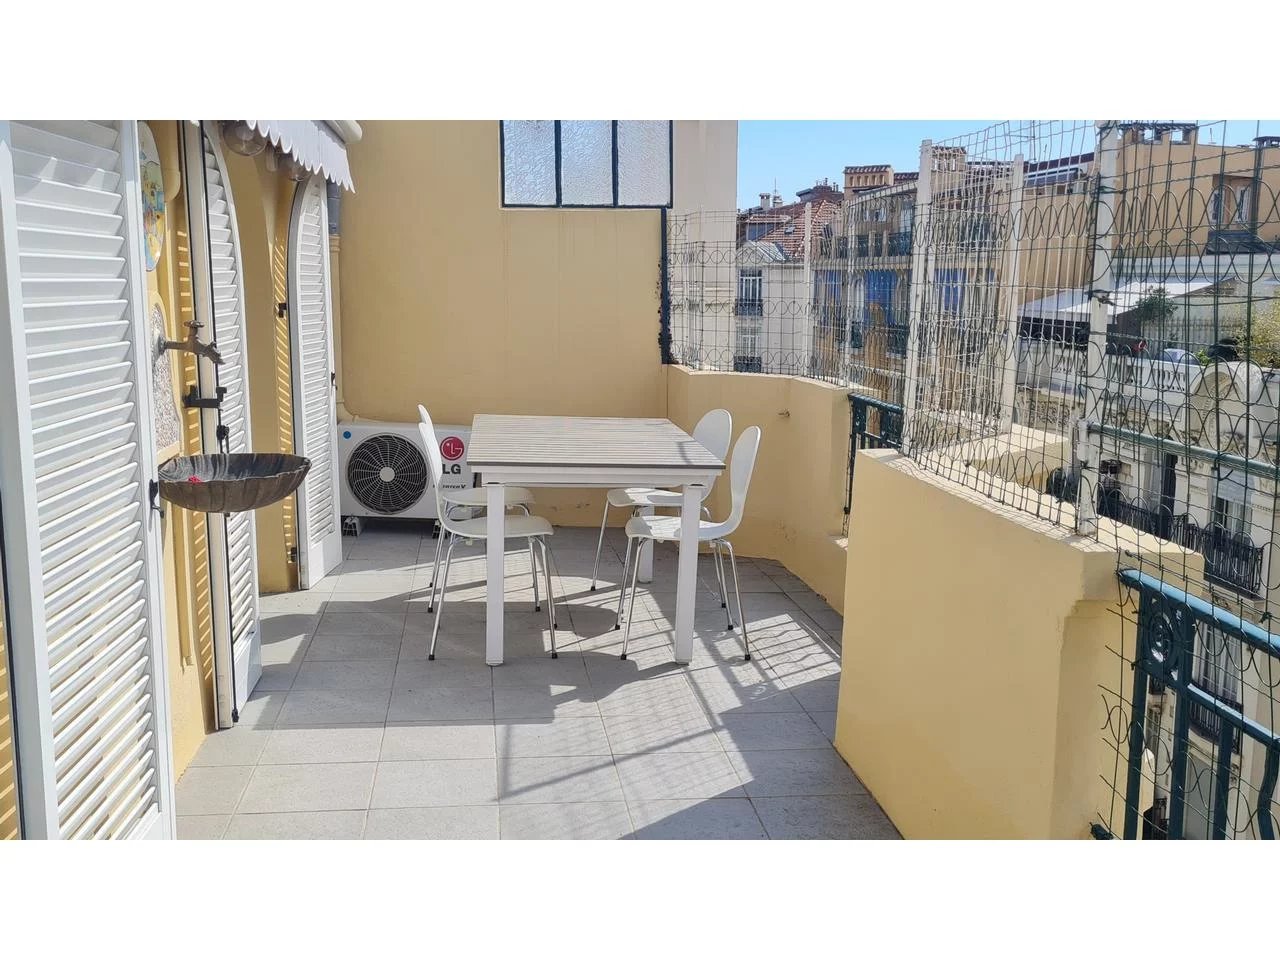 Appartement  3 Rooms 67m2  for sale   675 000 €